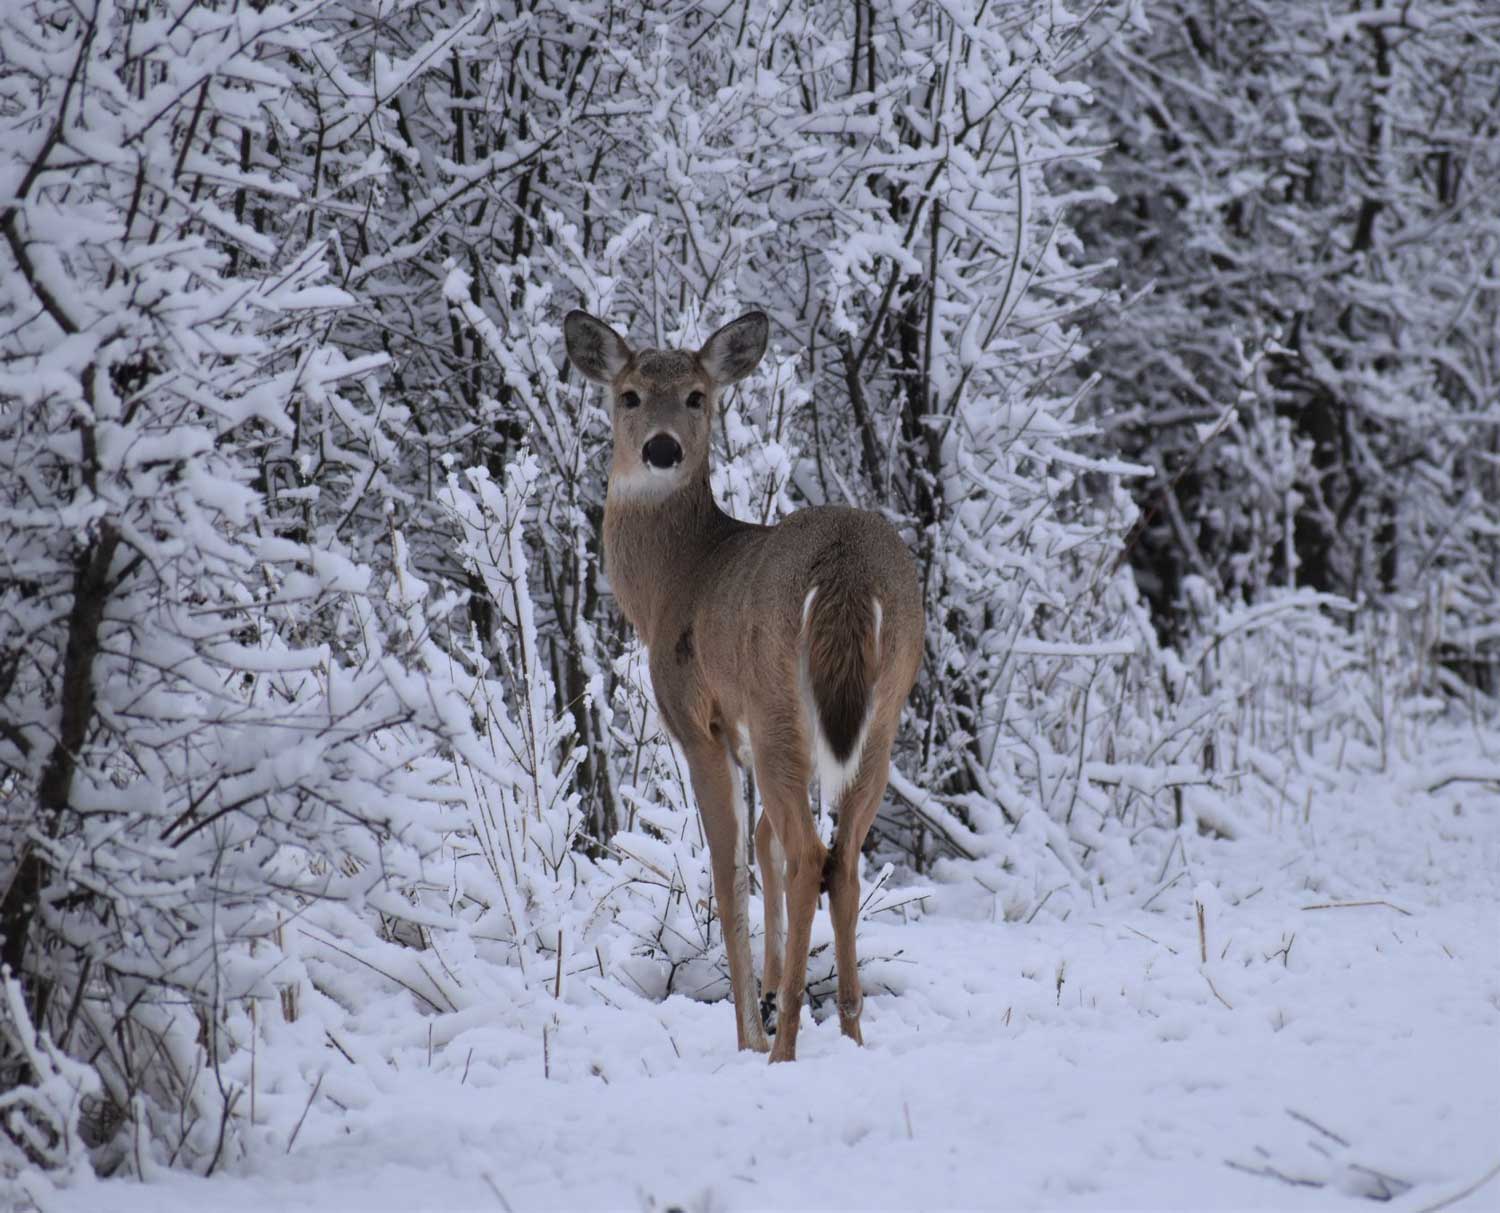 Feeding deer in winter: You're doing more harm than good